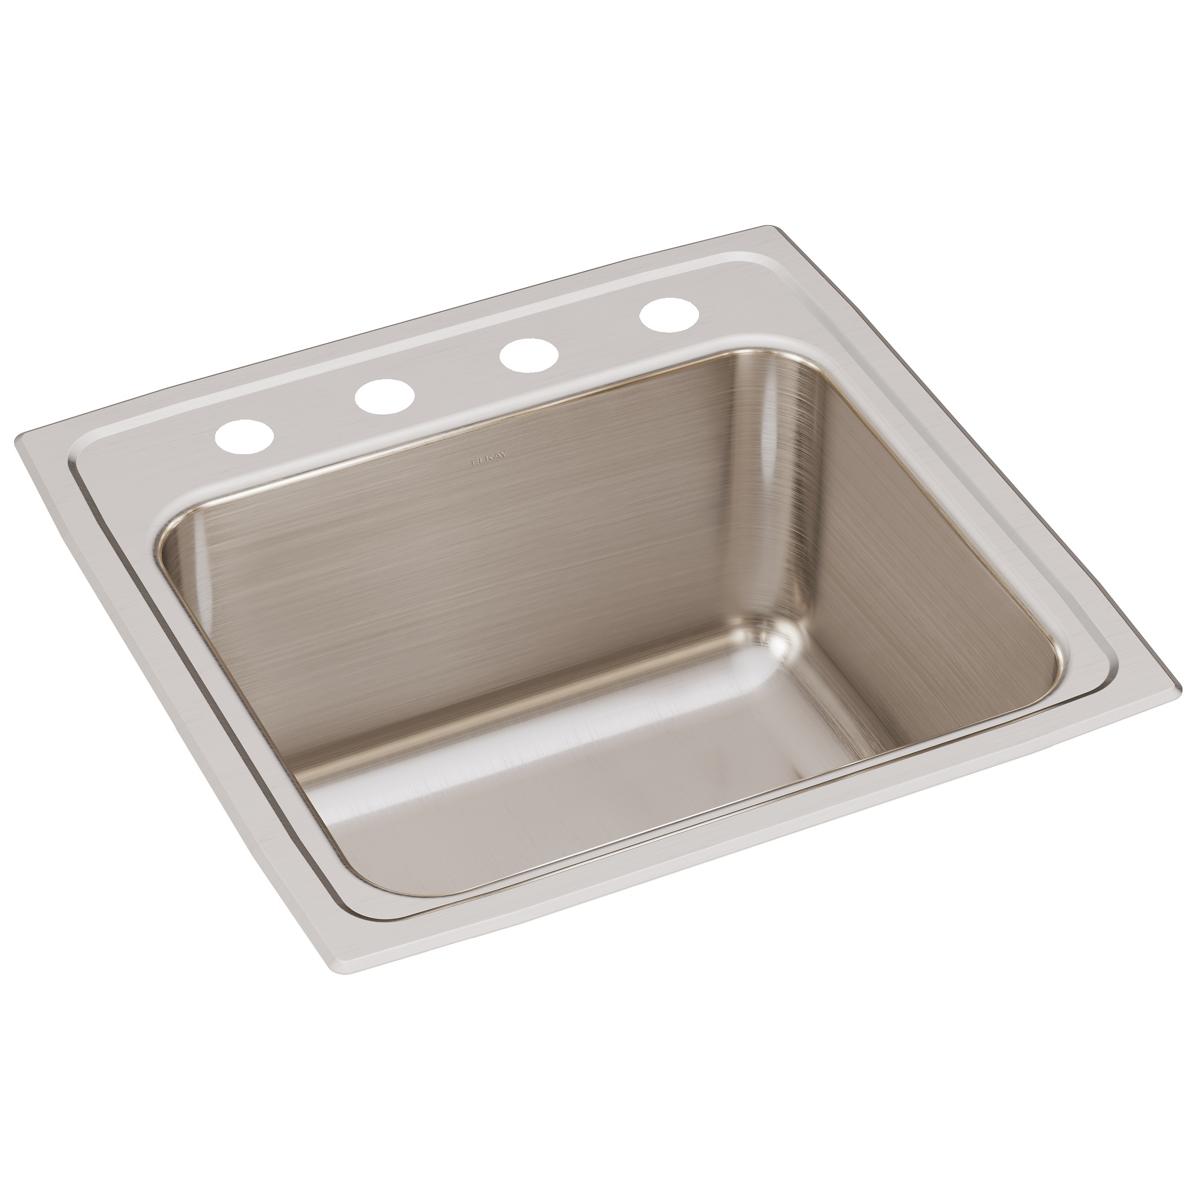 Elkay Lustertone Classic 19-1/2" x 19" x 10-1/8" OS4-Hole Single Bowl Drop-in Laundry Sink